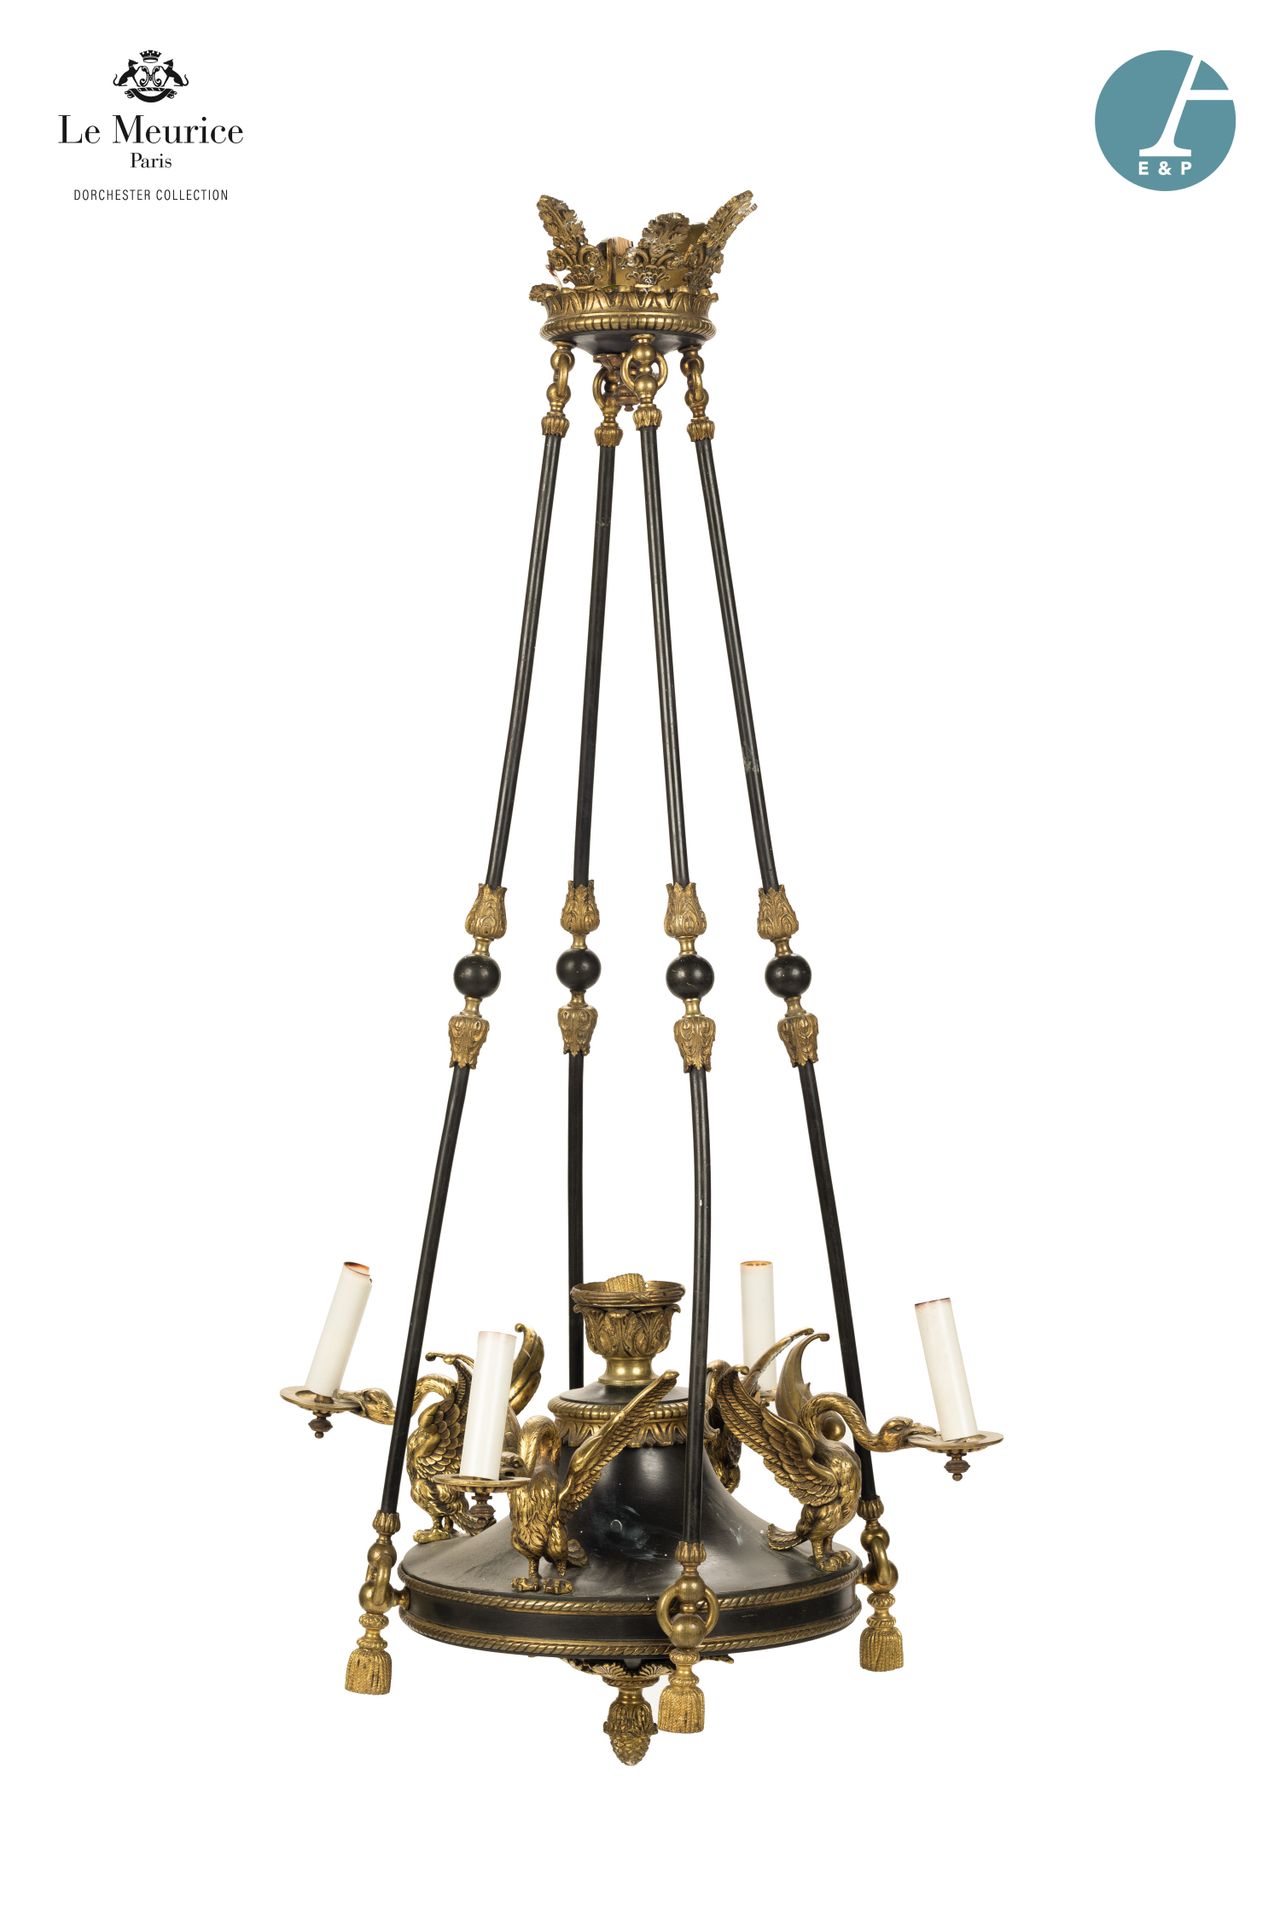 Null From the Hôtel Le Meurice.
Suspension lamp in gilded brass and black lacque&hellip;